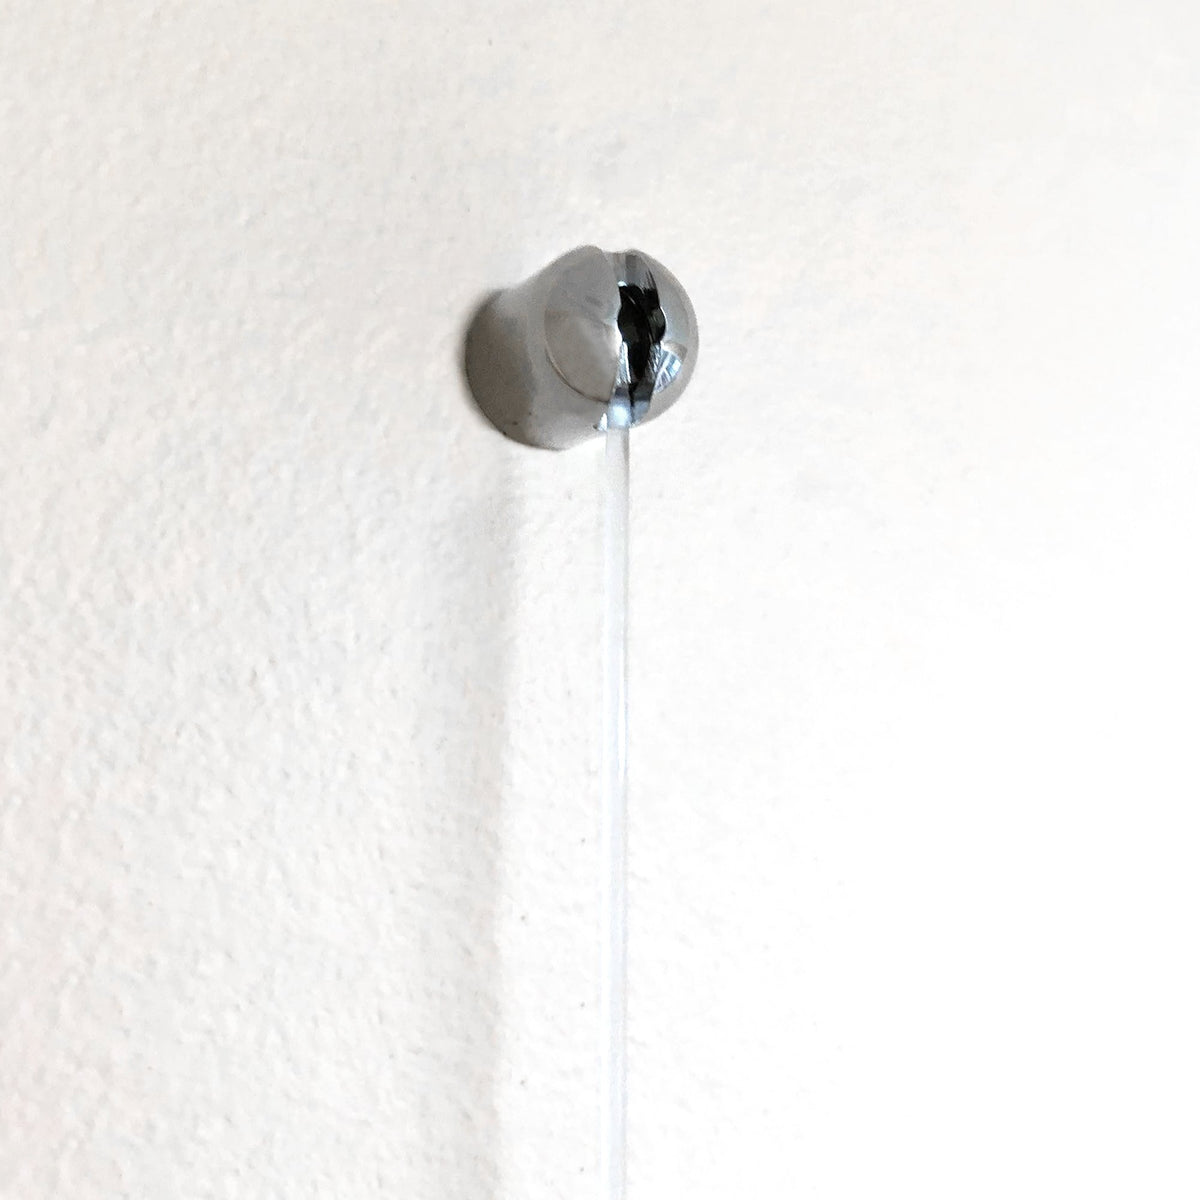 Stand Alone Gallery Nylon Cable - GS3-N72 - Picture Hang Solutions